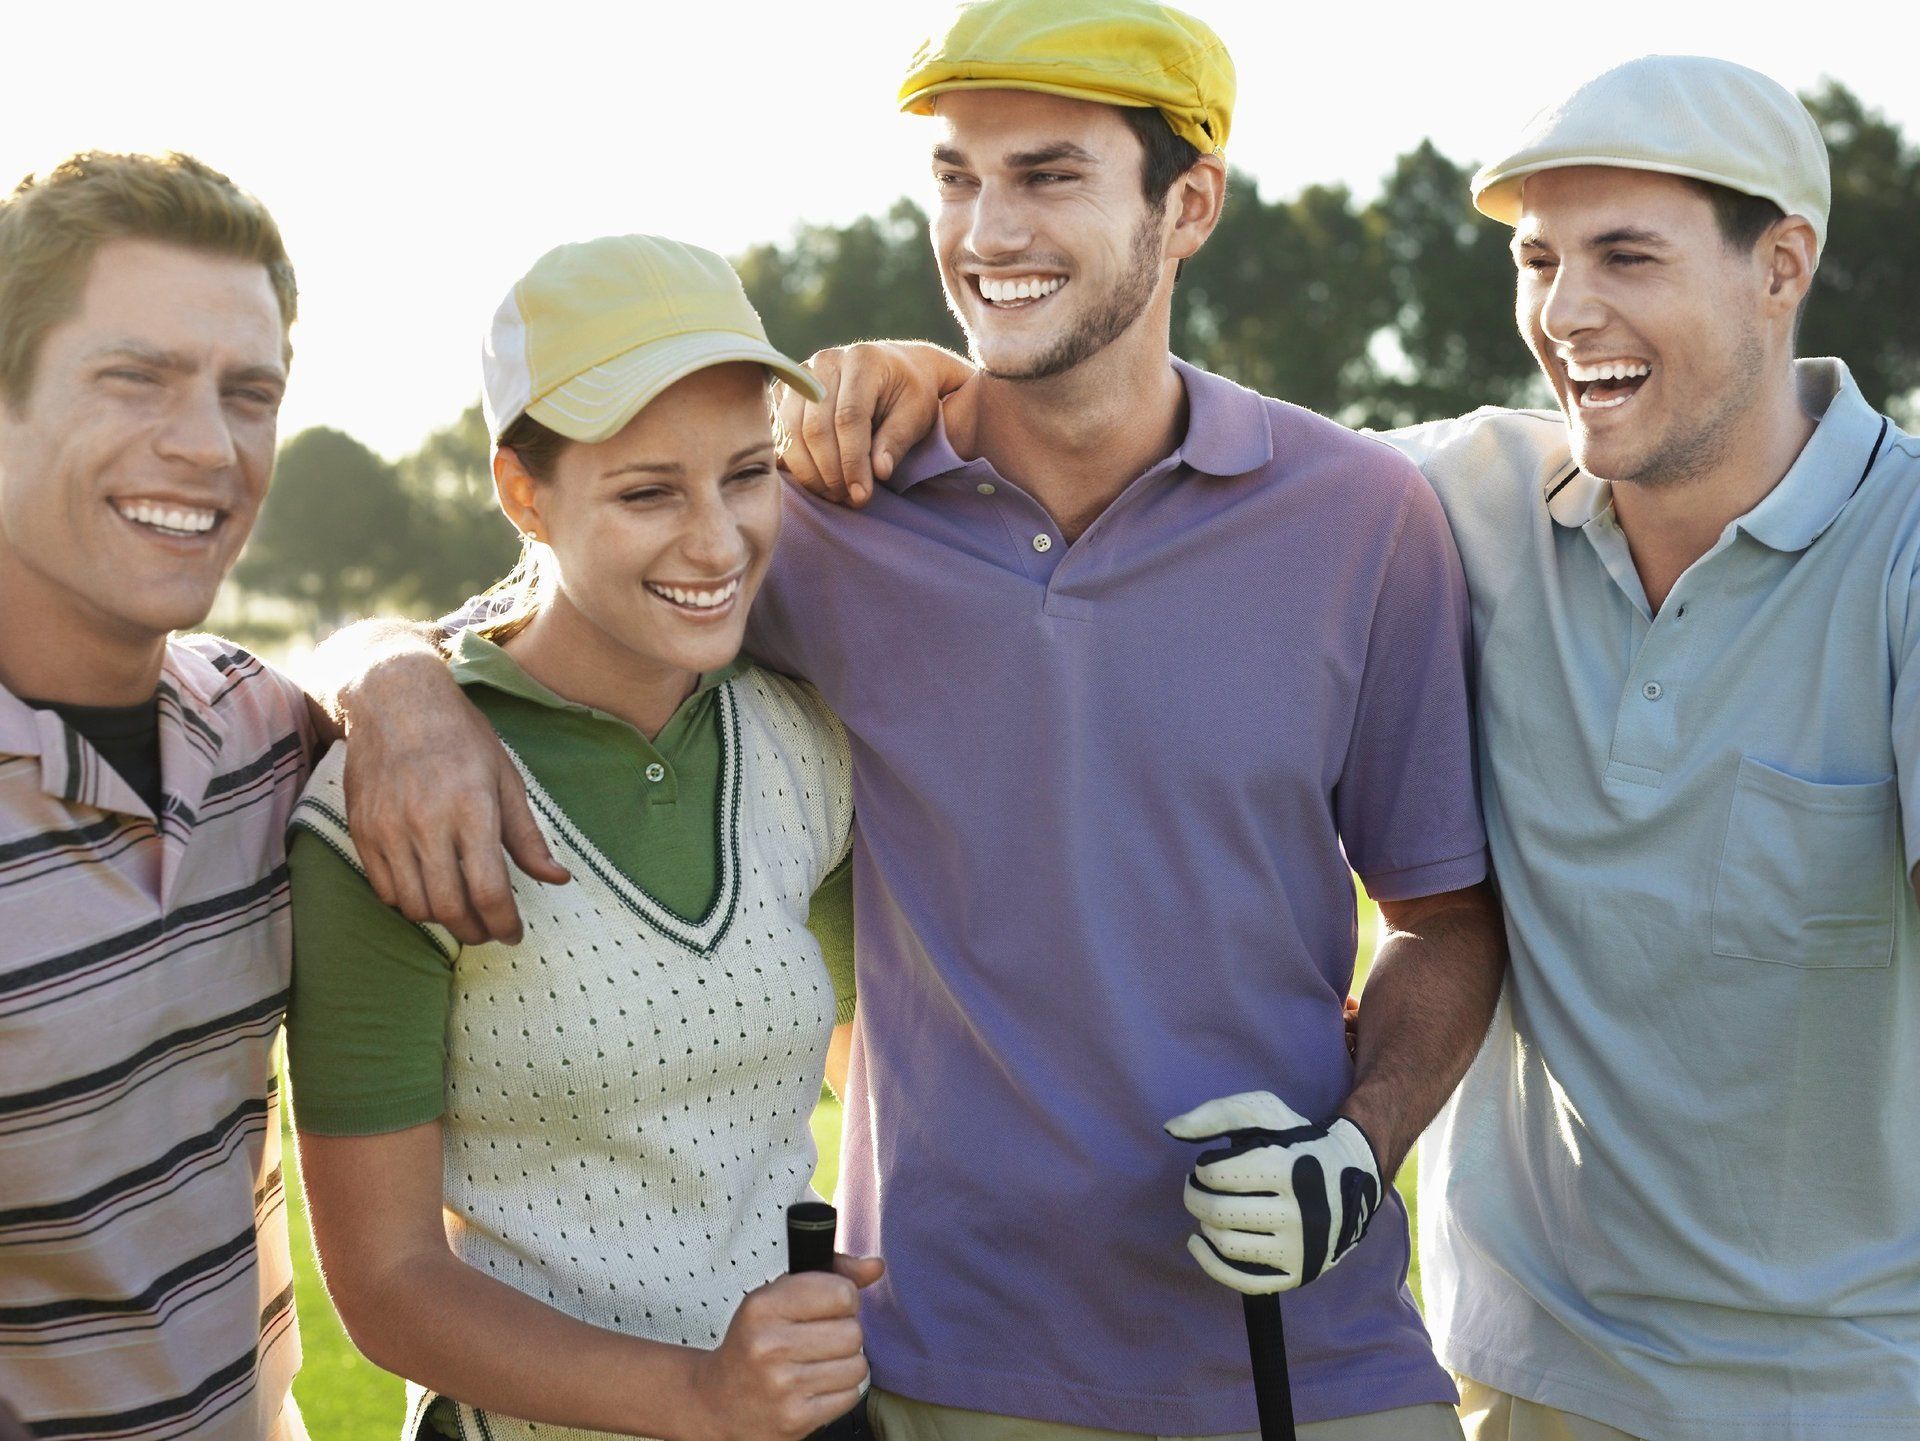 Four young people having fun on the golf course